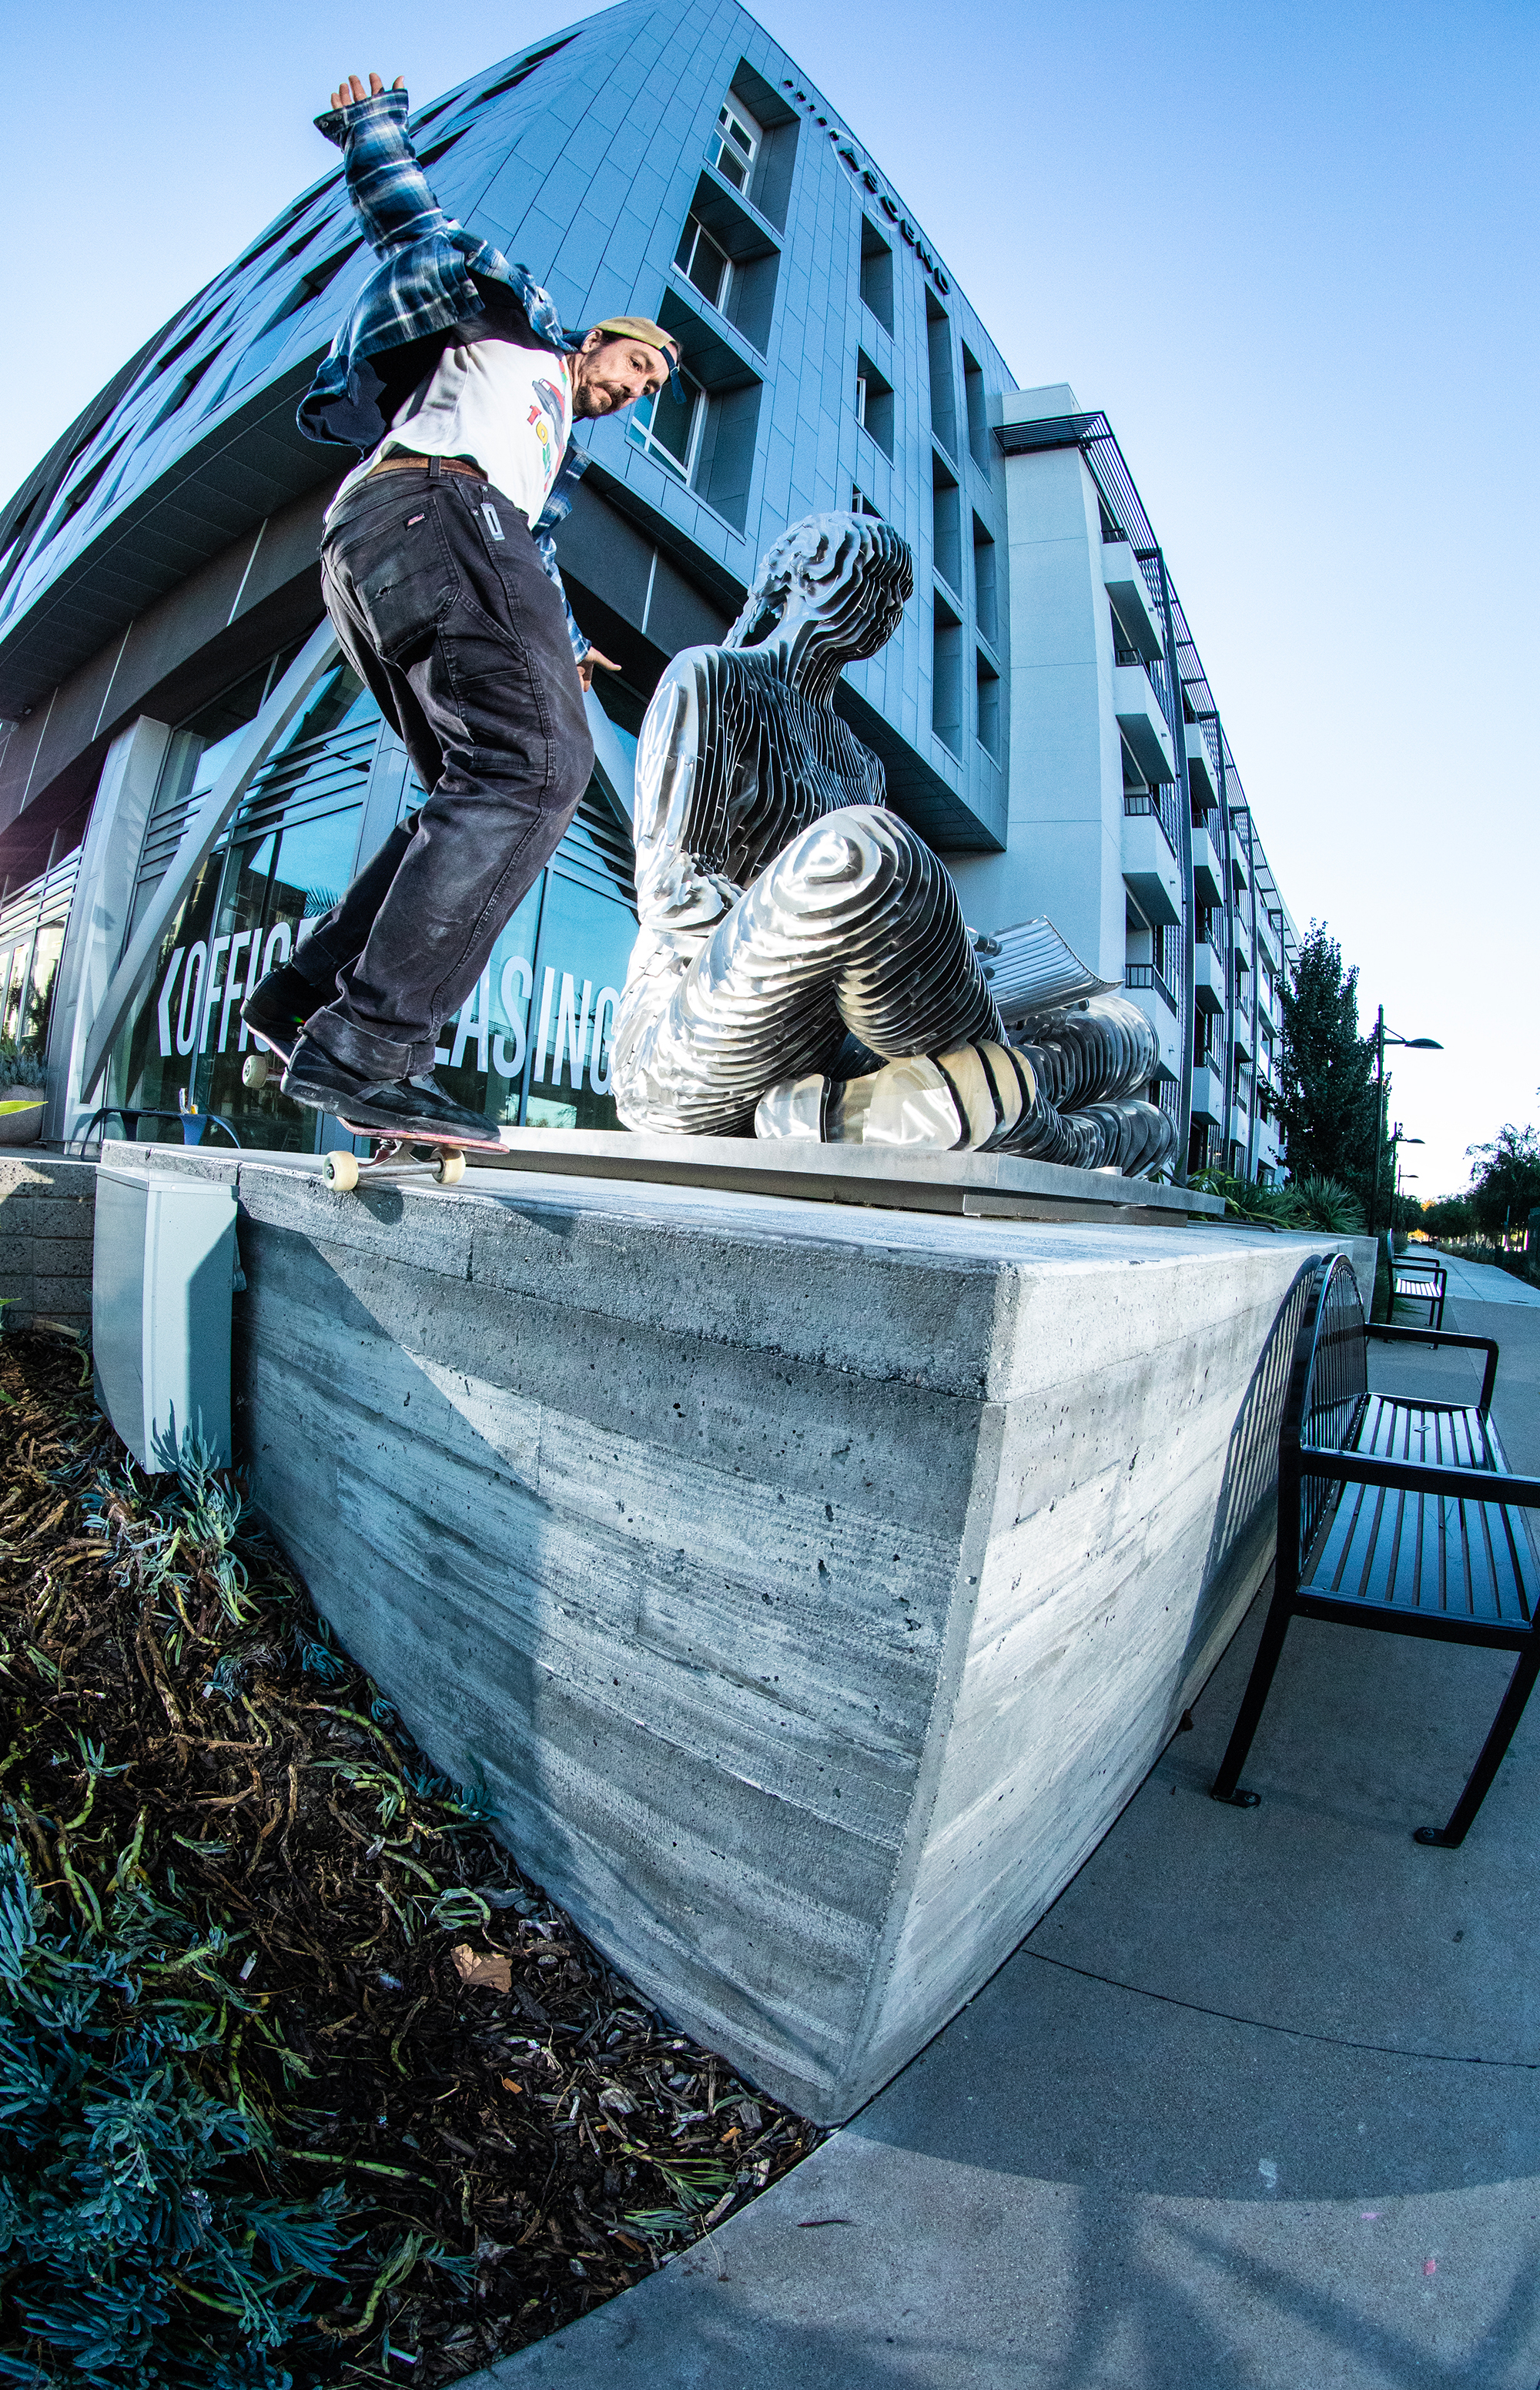 Caswell Berry nosegrind Milpitas statue ledge 1 shot by Austin Gardner 2000